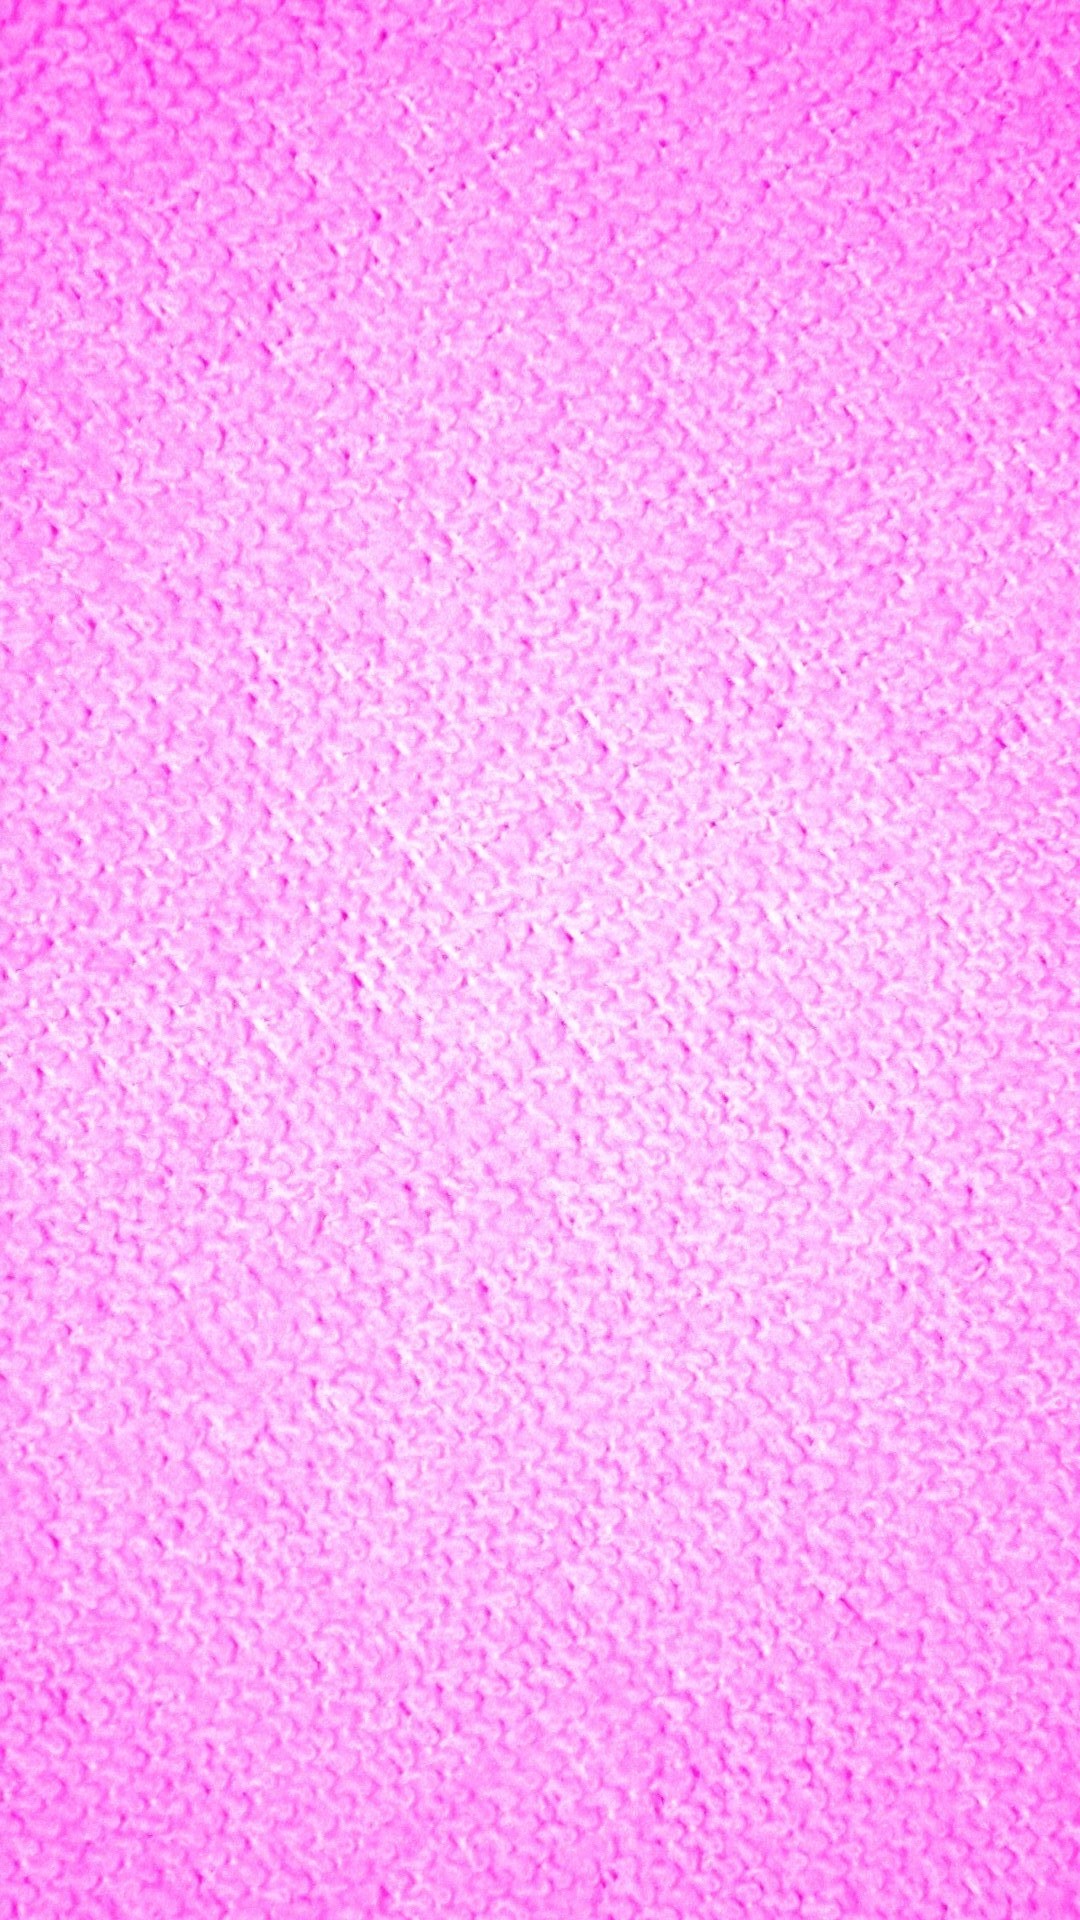 Wallpaper Pink For Android with HD resolution 1080x1920